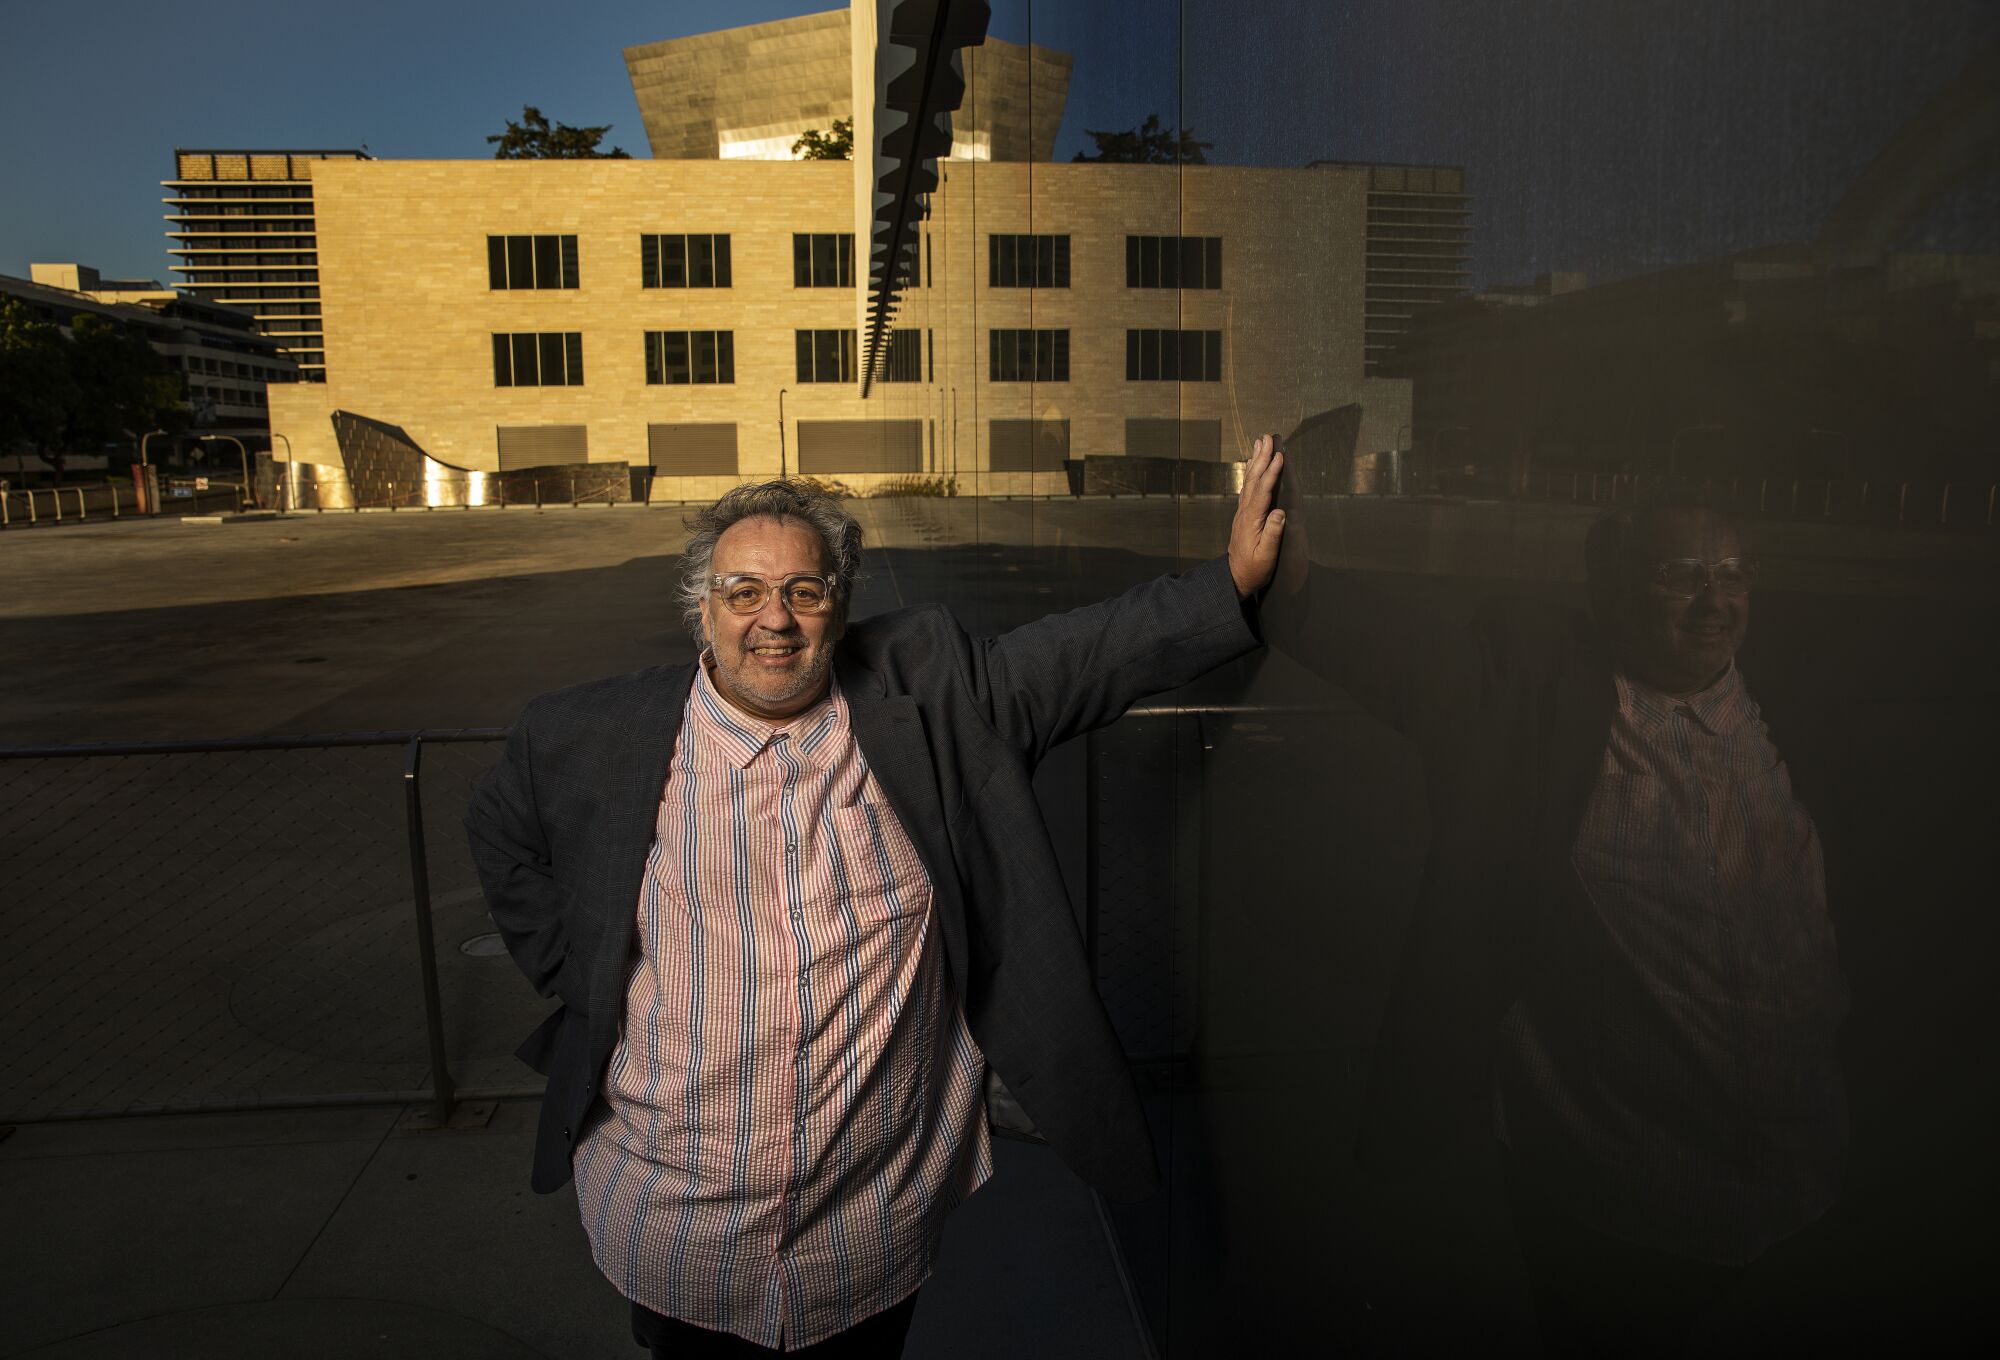 Luis Alfaro, in a dark jacket and a striped shirt, leans against a glassy wall in afternoon light